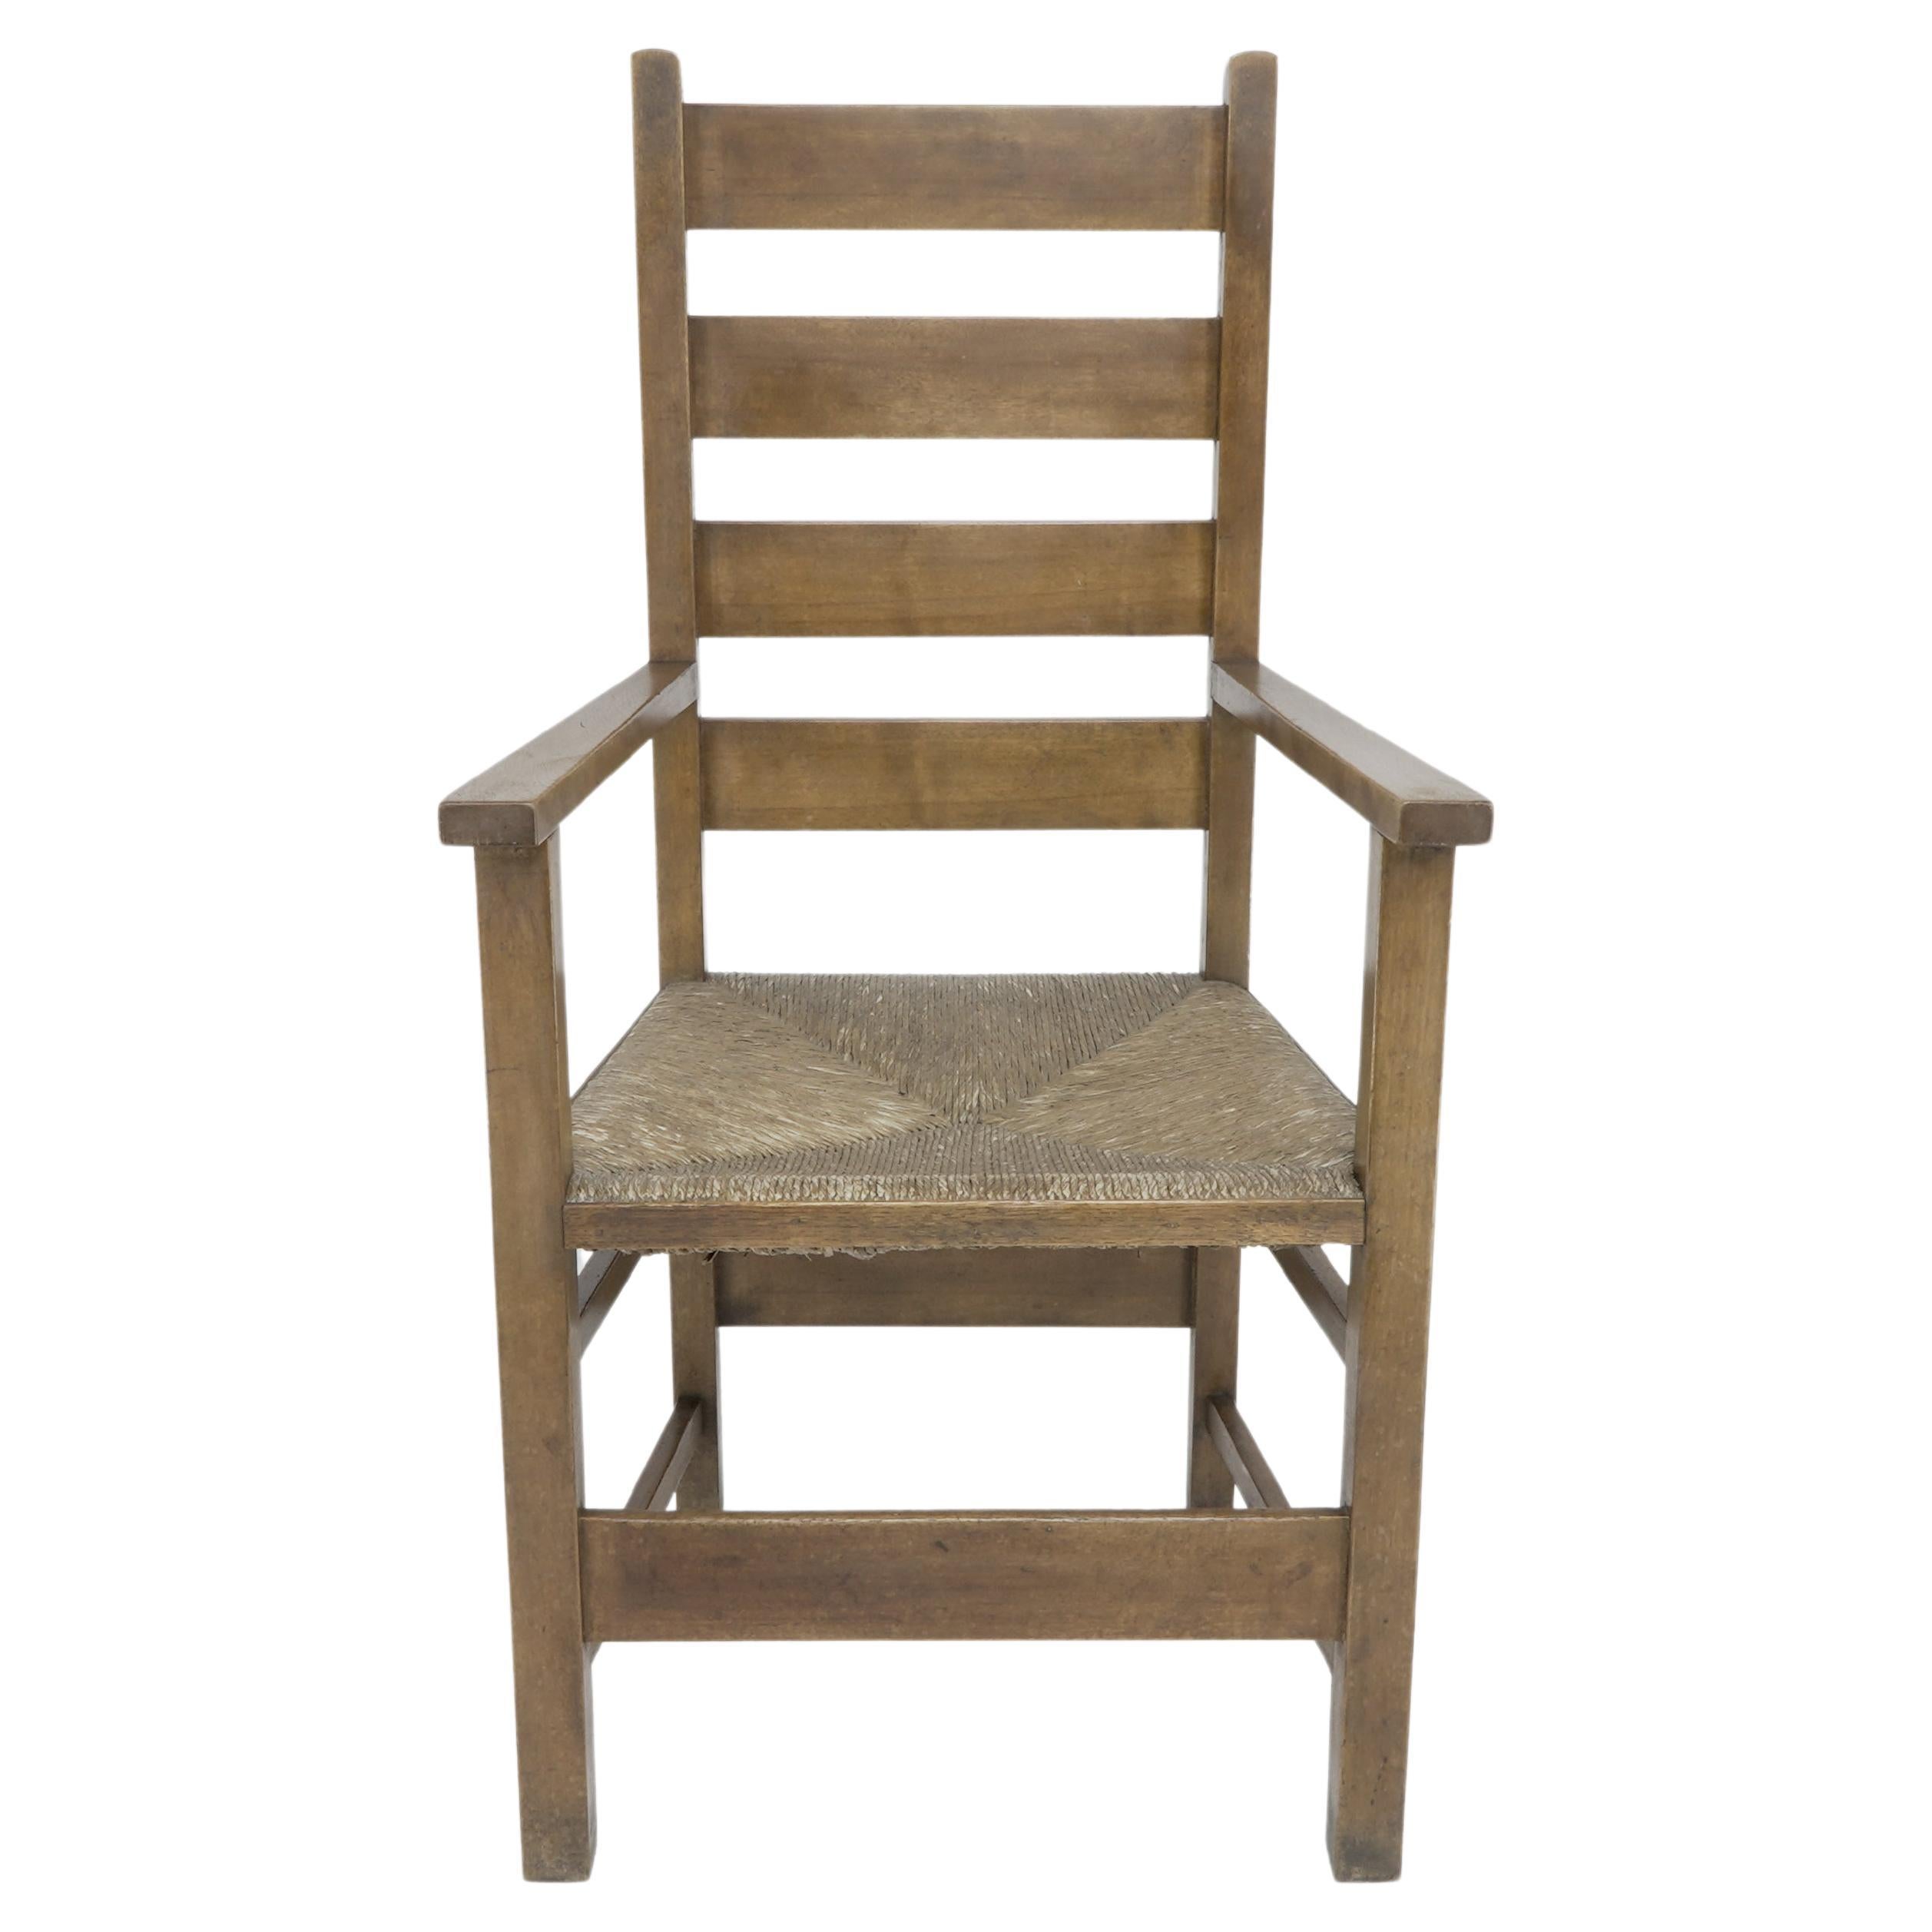 M H Baillie Scott. An Arts and Crafts oak and rush seat ladder back armchair made by J P White at The Pyghtle Works in Bedford. Illustrated in: Furniture made at The Pyghtle Works Bedford by J P White. Designed by M H Baillie Scott, Fig No 8.
